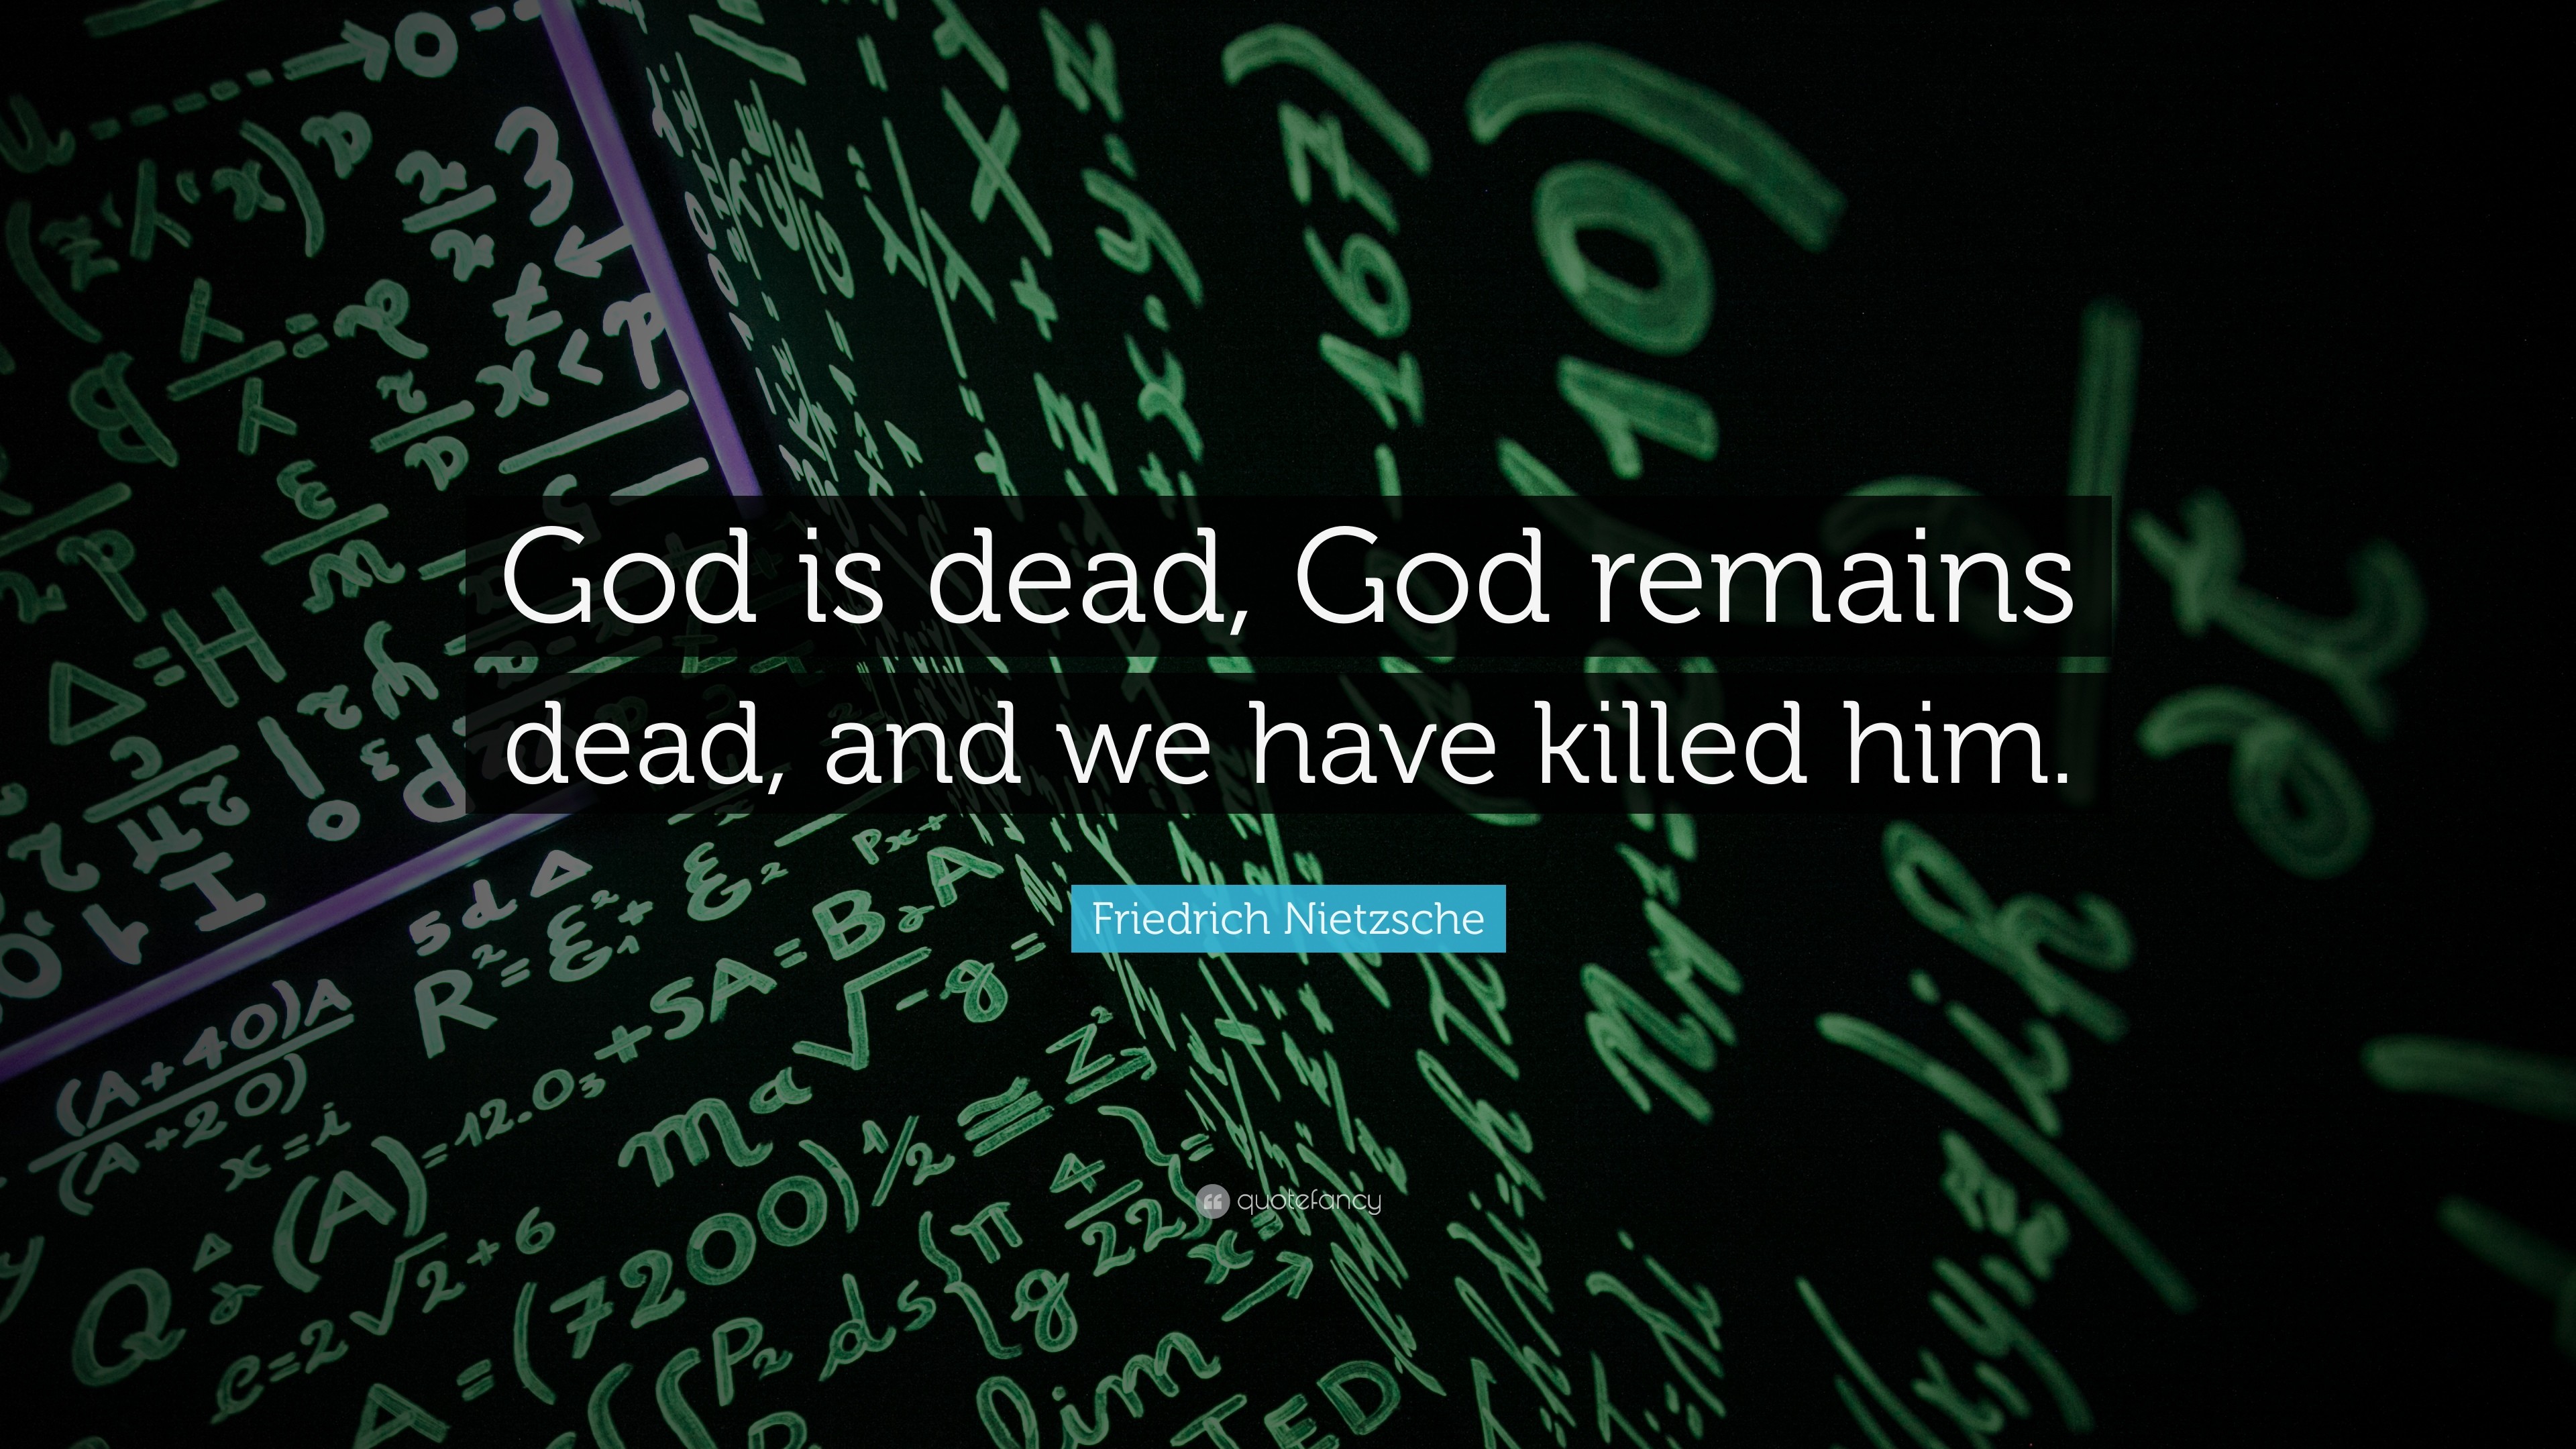 Science Quotes: “God is dead, God remains dead, and we have killed